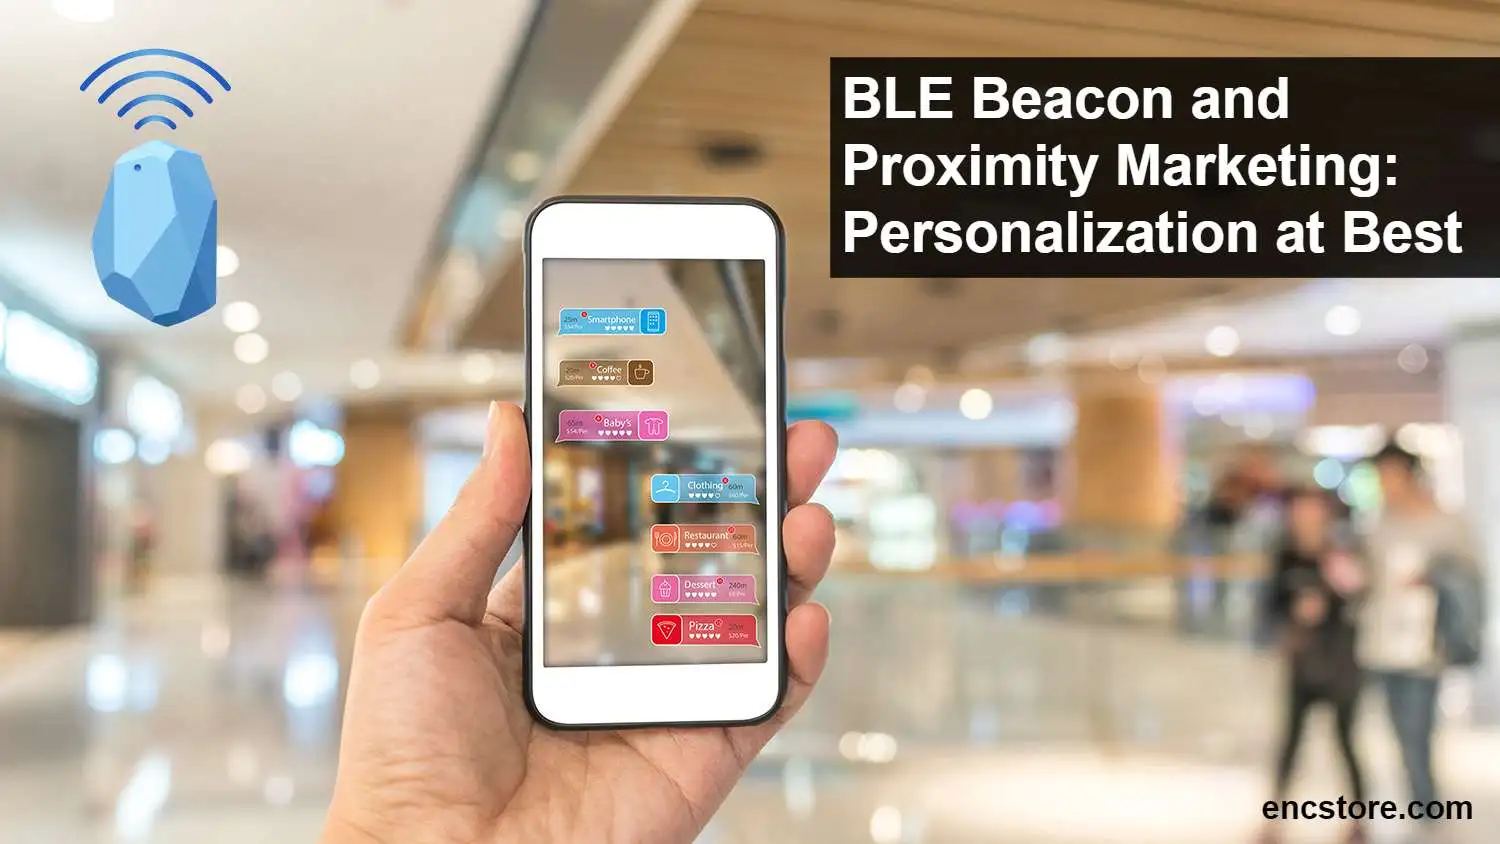 BLE Beacon and Proximity Marketing:  Personalization at Best